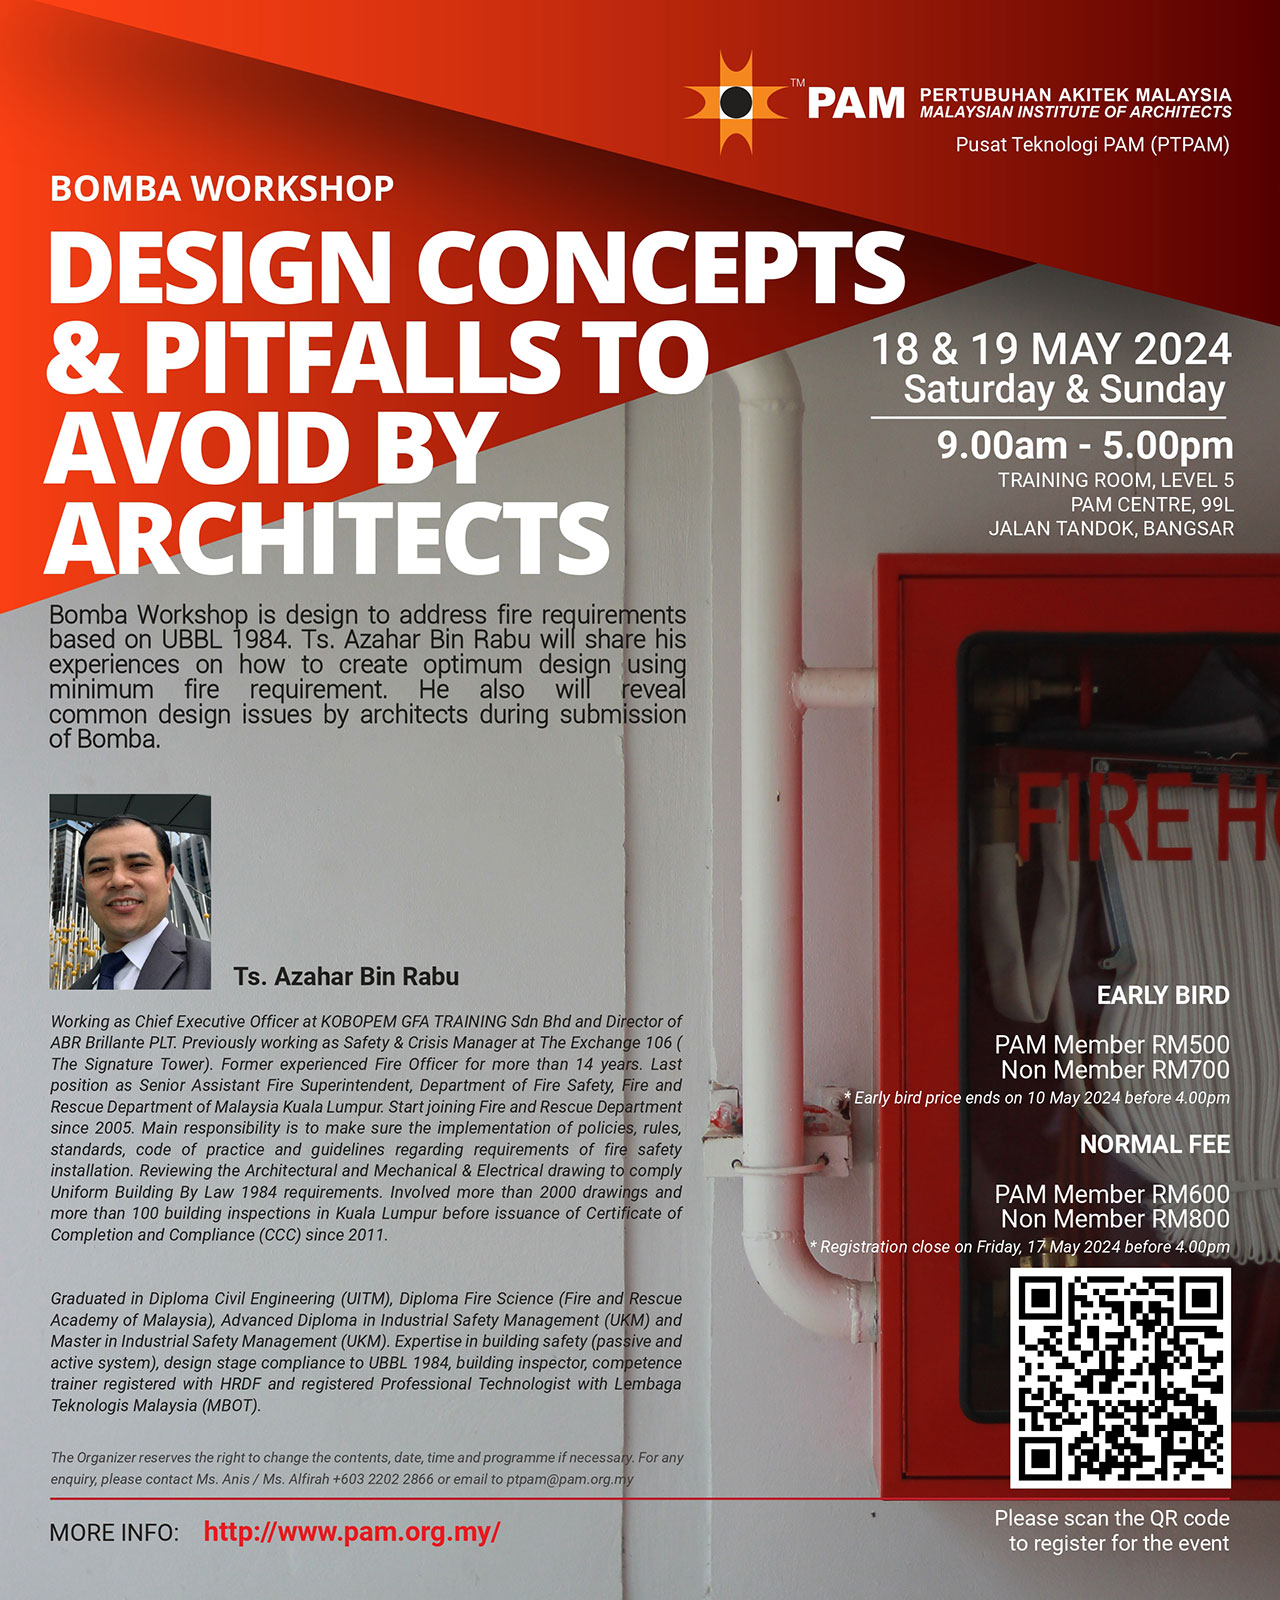 Bomba Workshop: Design Concepts & Pitfalls To Avoid by Architects